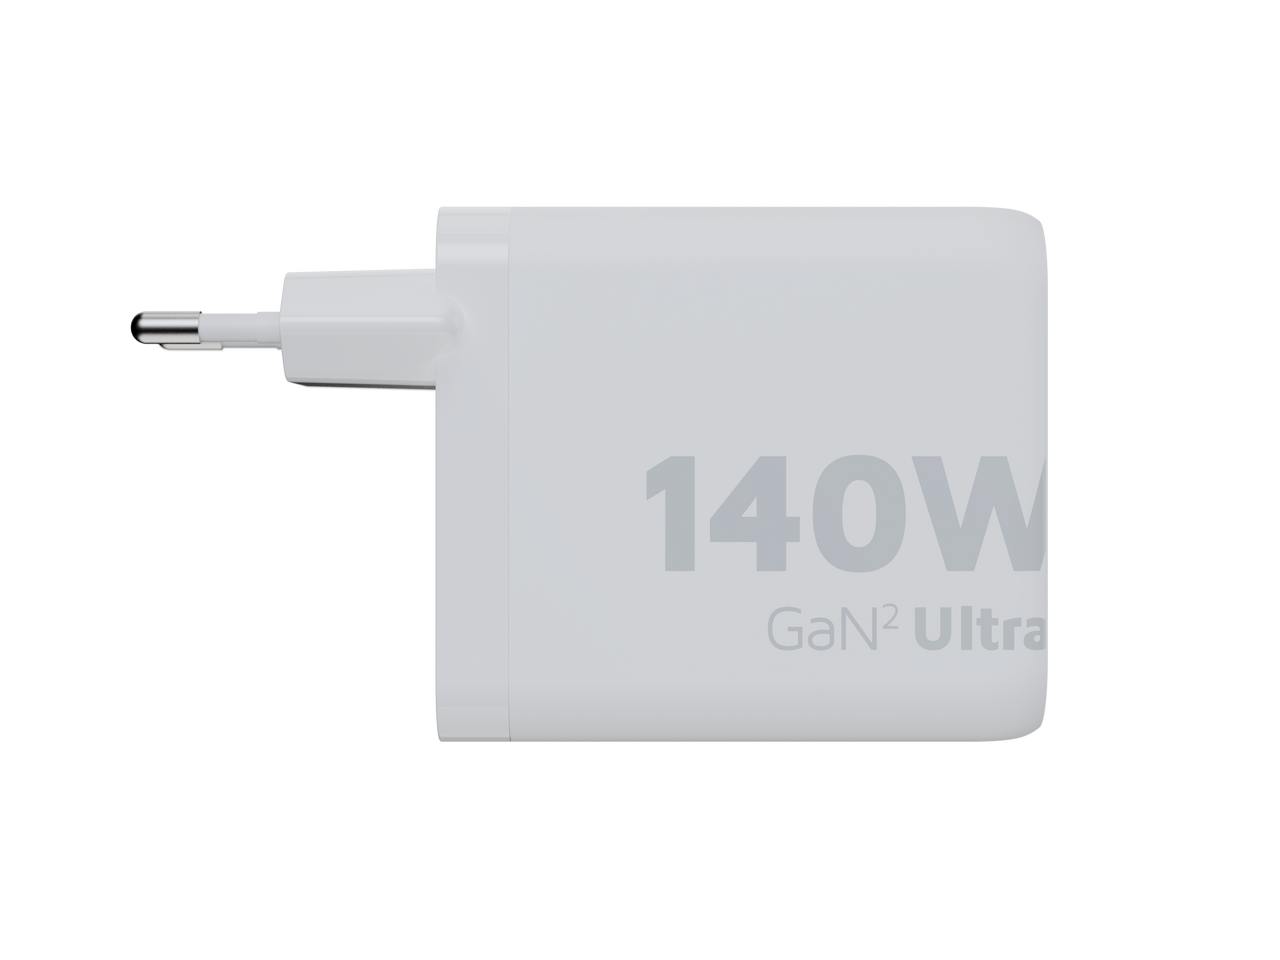 140W GaN2 Laptop Wall Charger